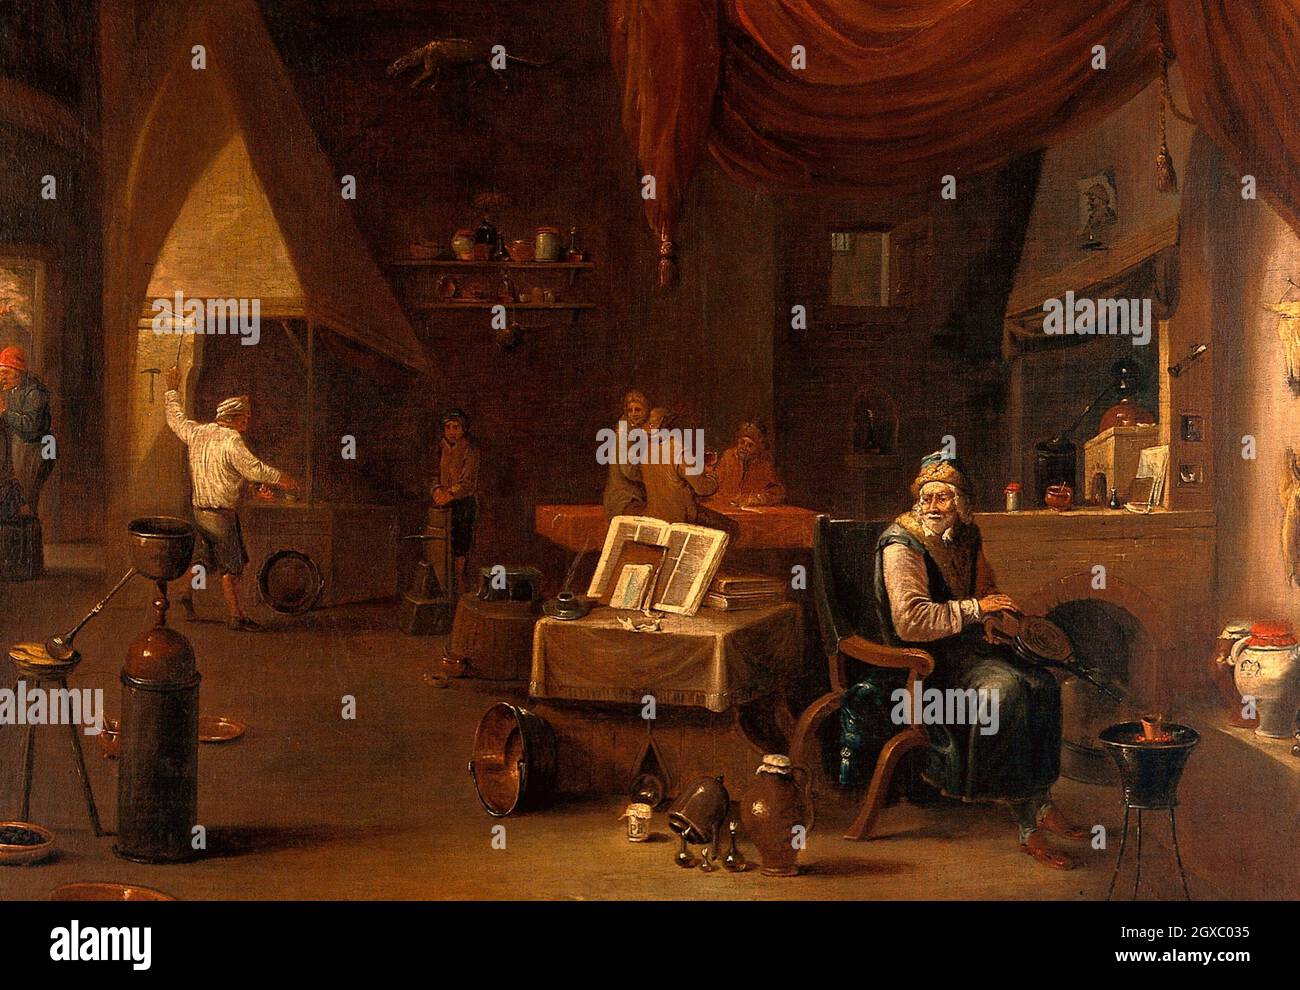 An alchemist in his laboratory. Oil painting. Alchemy (from Arabic: al-kimiya; from Ancient Greek: khumeía) is an ancient branch of natural Stock Photo